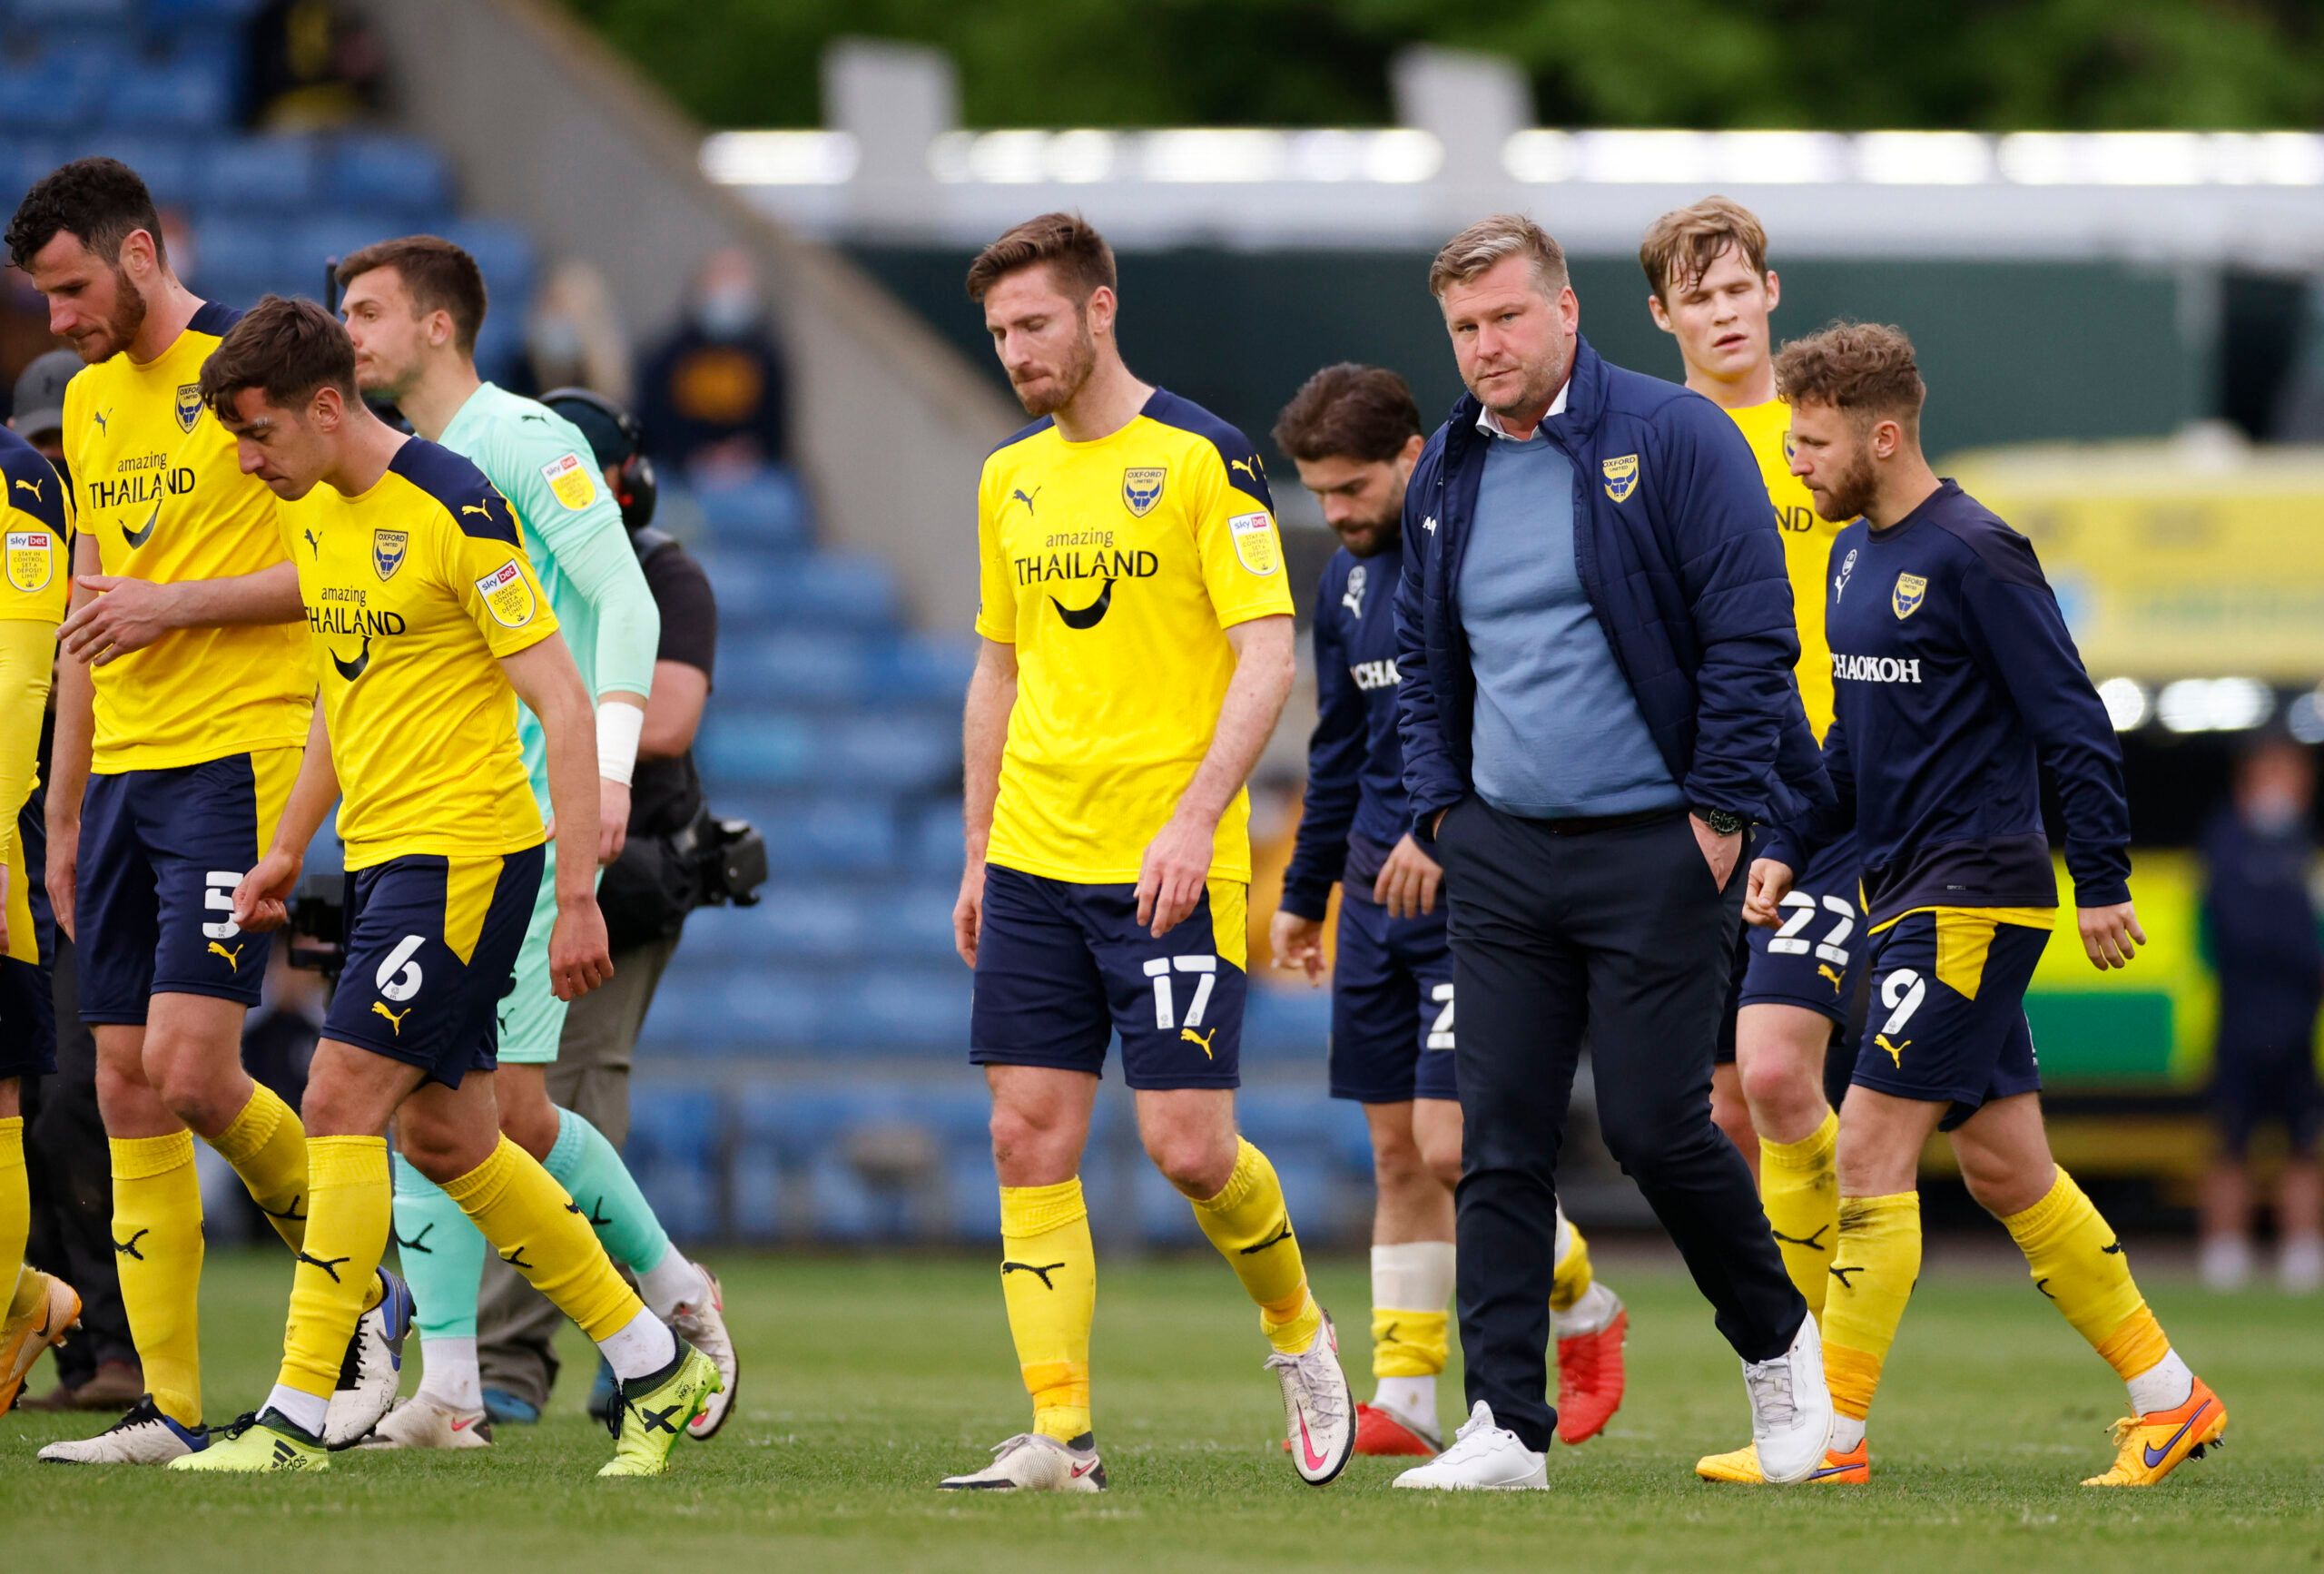 Soccer Football - League One - Play-Off Semi Final First Leg - Oxford United v Blackpool - Kassam Stadium, Oxford, Britain - May 18, 2021 Oxford United manager Karl Robinson with his team after the match Action Images/John Sibley EDITORIAL USE ONLY. No use with unauthorized audio, video, data, fixture lists, club/league logos or 'live' services. Online in-match use limited to 75 images, no video emulation. No use in betting, games or single club /league/player publications.  Please contact your 